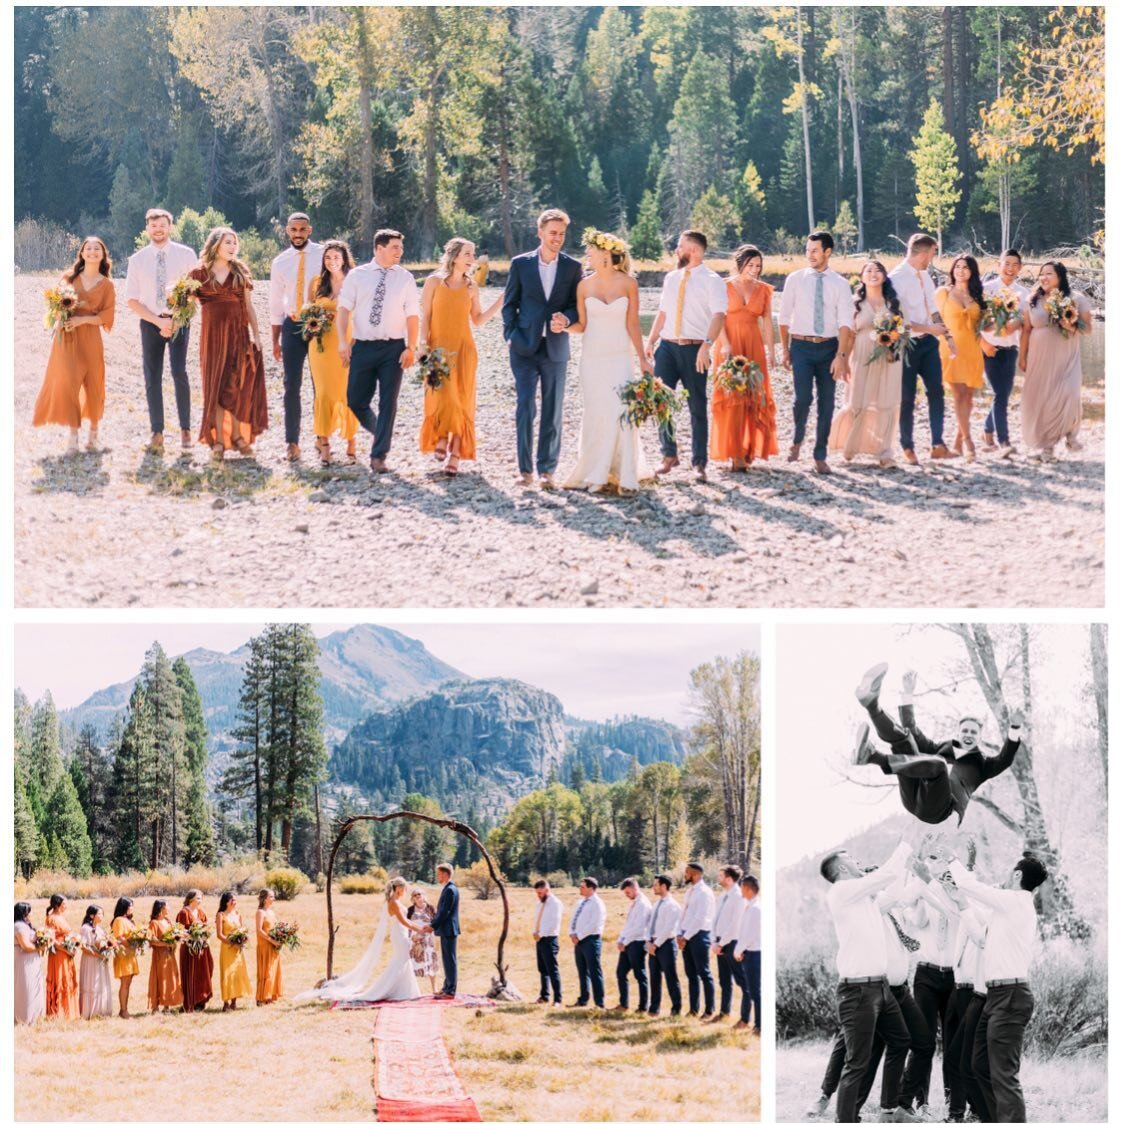 A mountaintop dream come true✨ this wedding looks like one that is unforgettable!